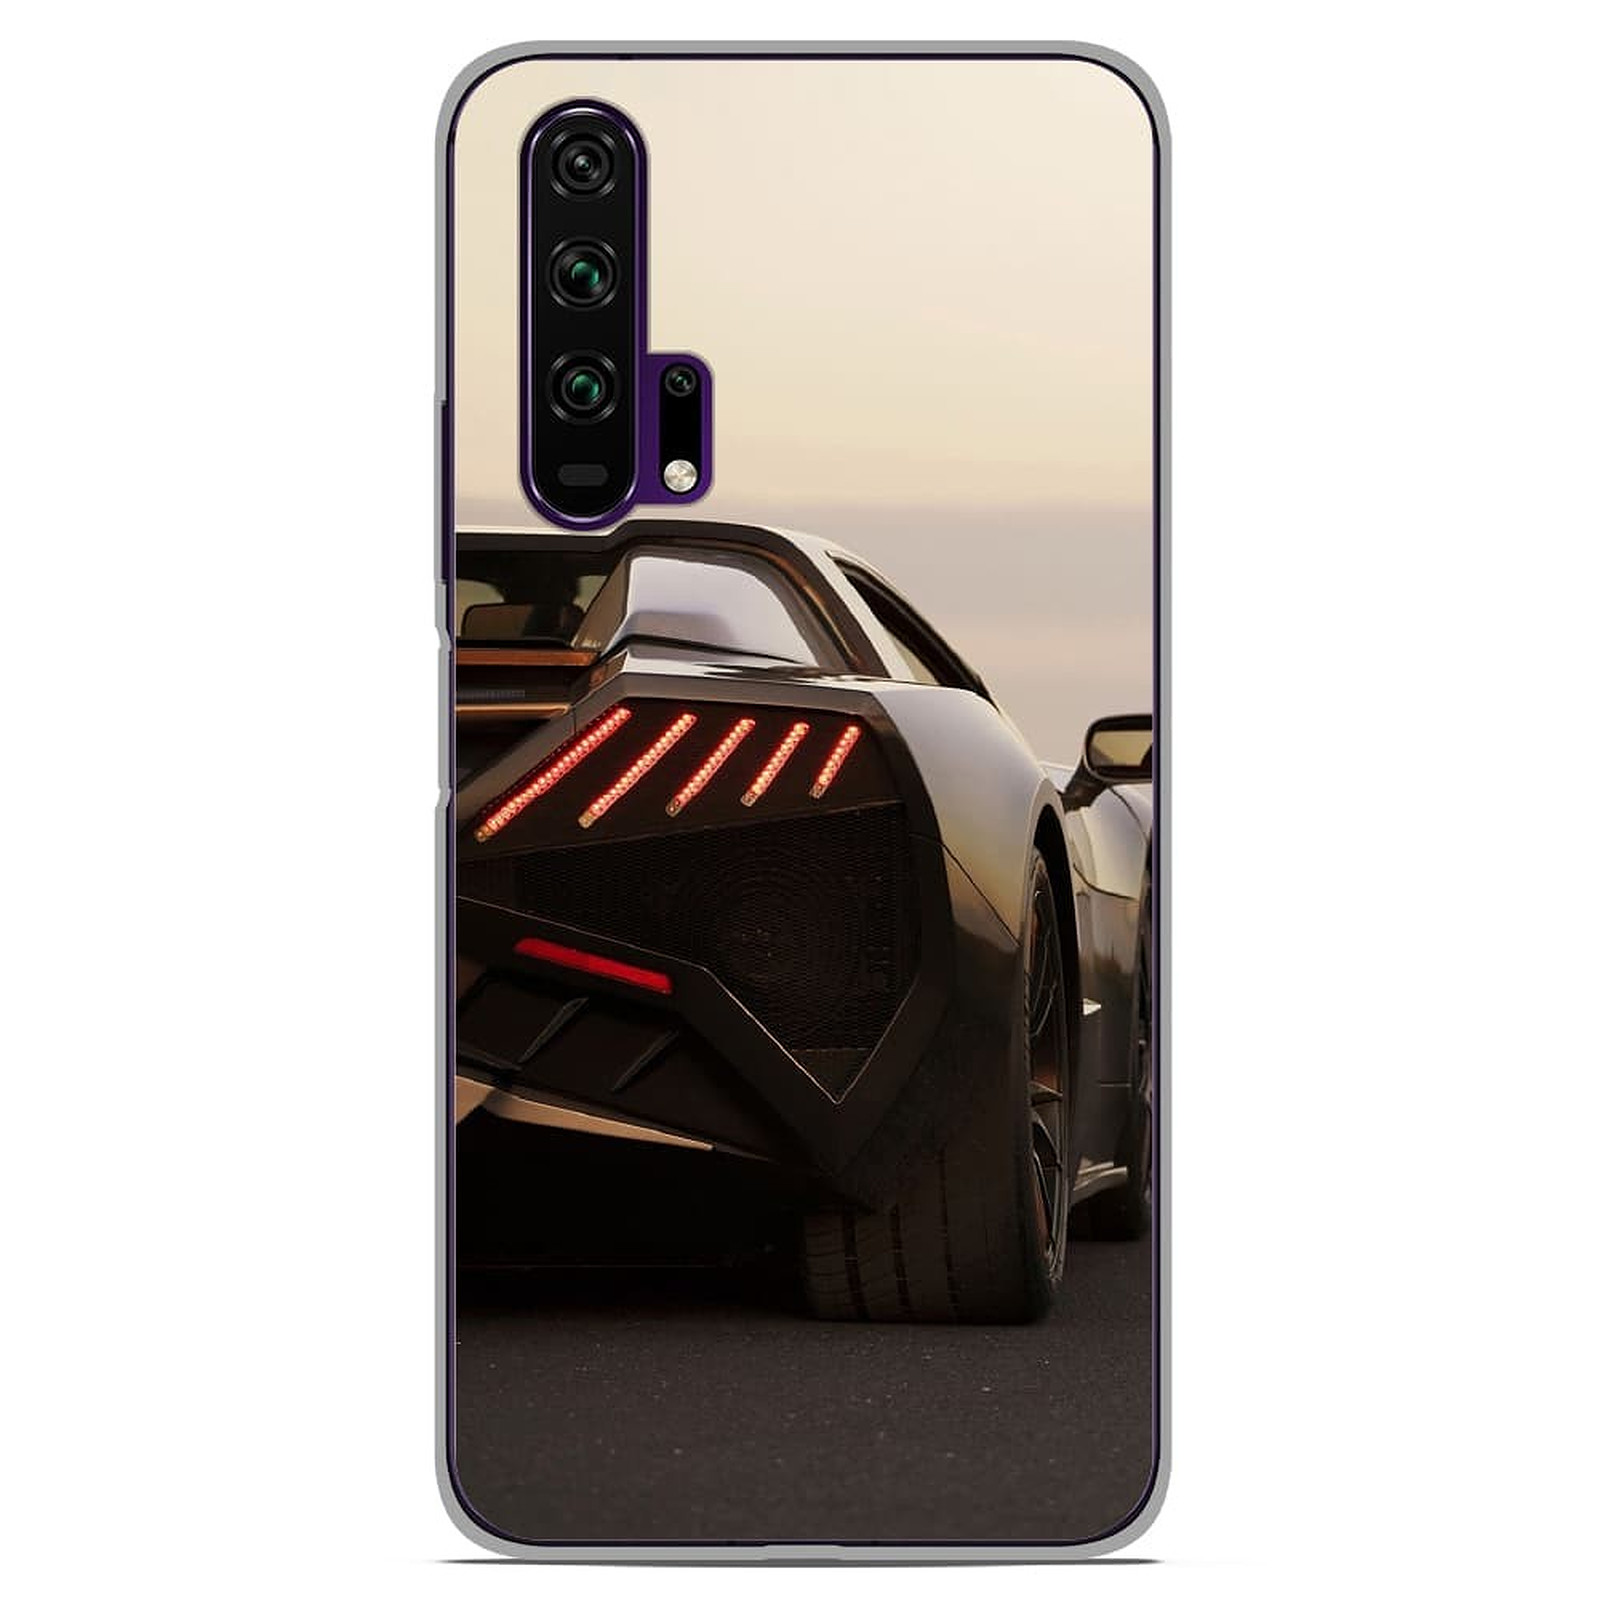 1001 Coques Coque silicone gel Huawei Honor 20 Pro motif Lambo - Coque telephone 1001Coques